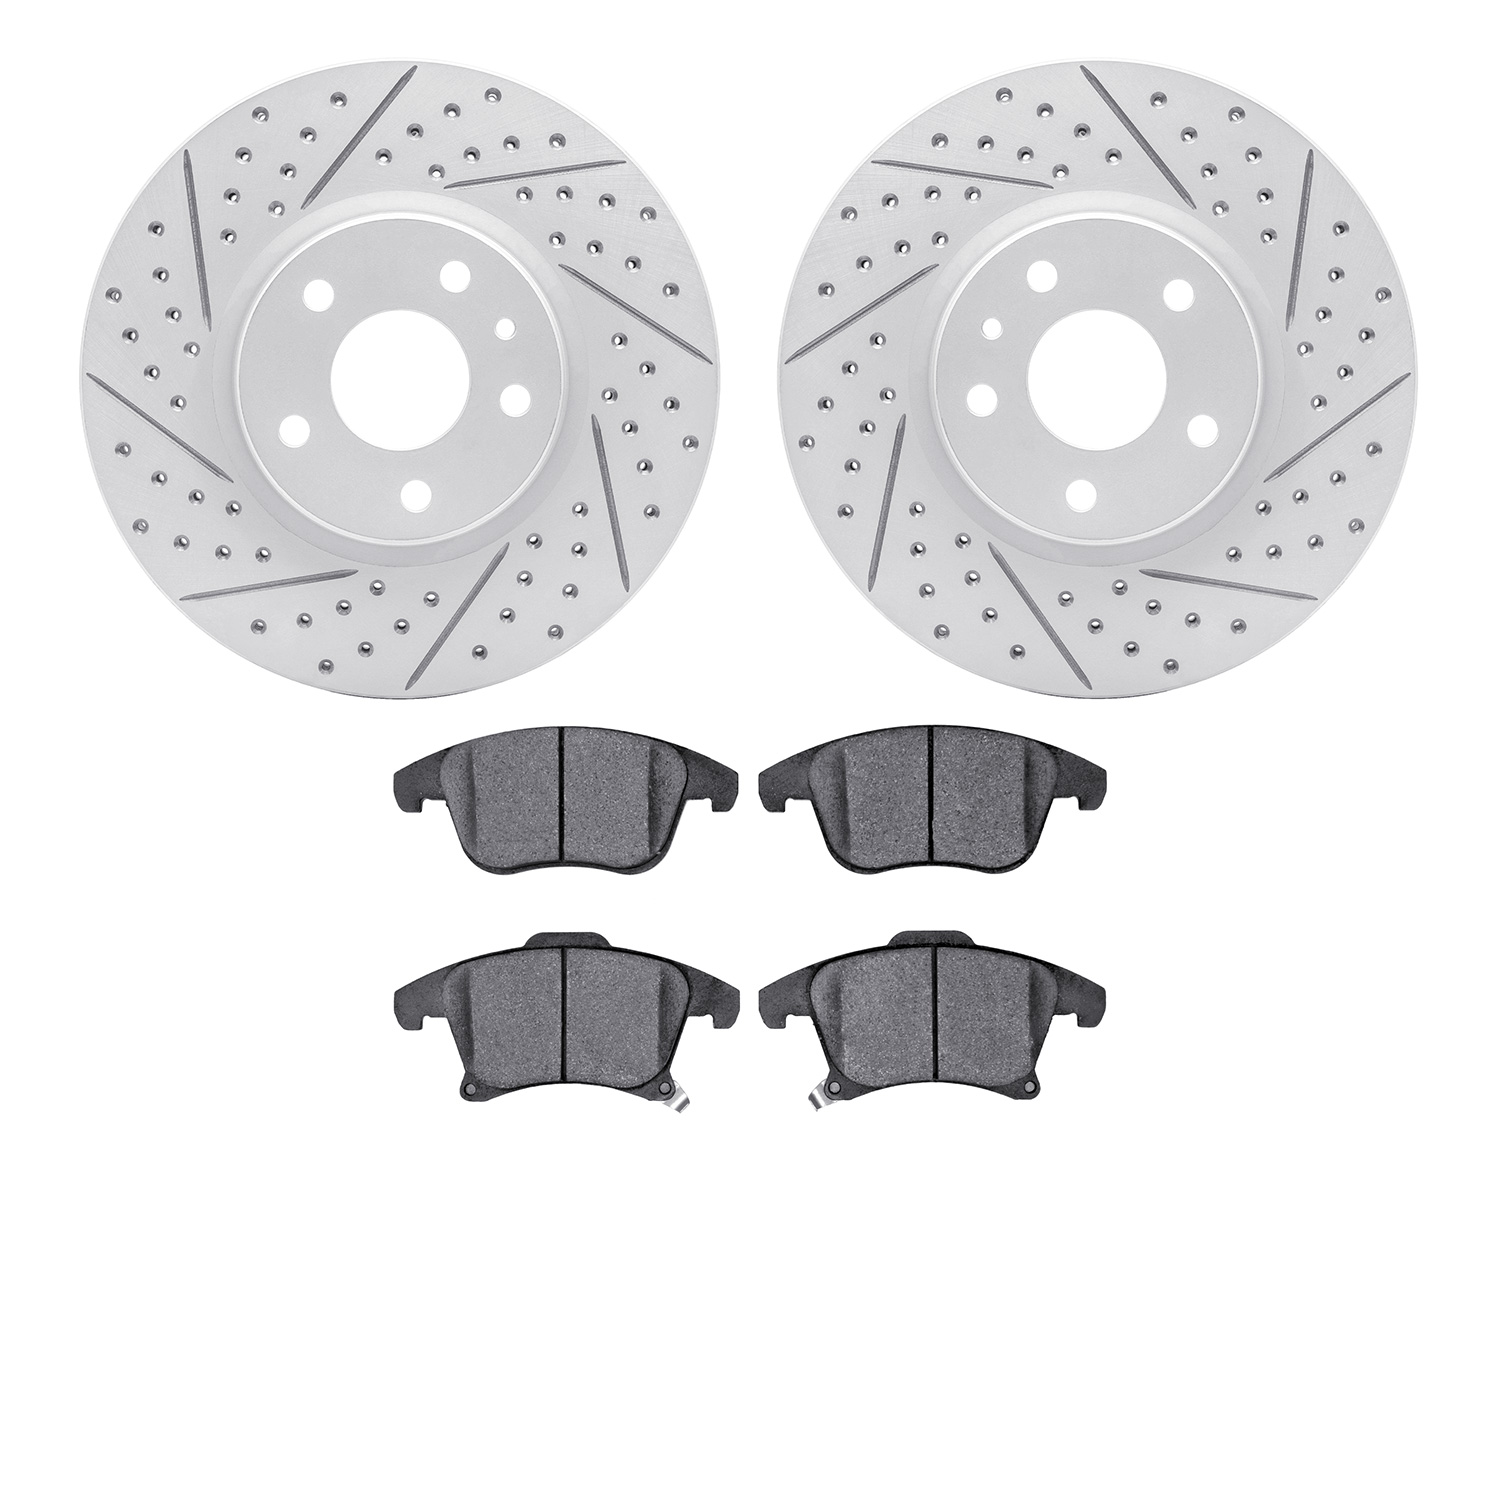 2502-54239 Geoperformance Drilled/Slotted Rotors w/5000 Advanced Brake Pads Kit, 2013-2020 Ford/Lincoln/Mercury/Mazda, Position: